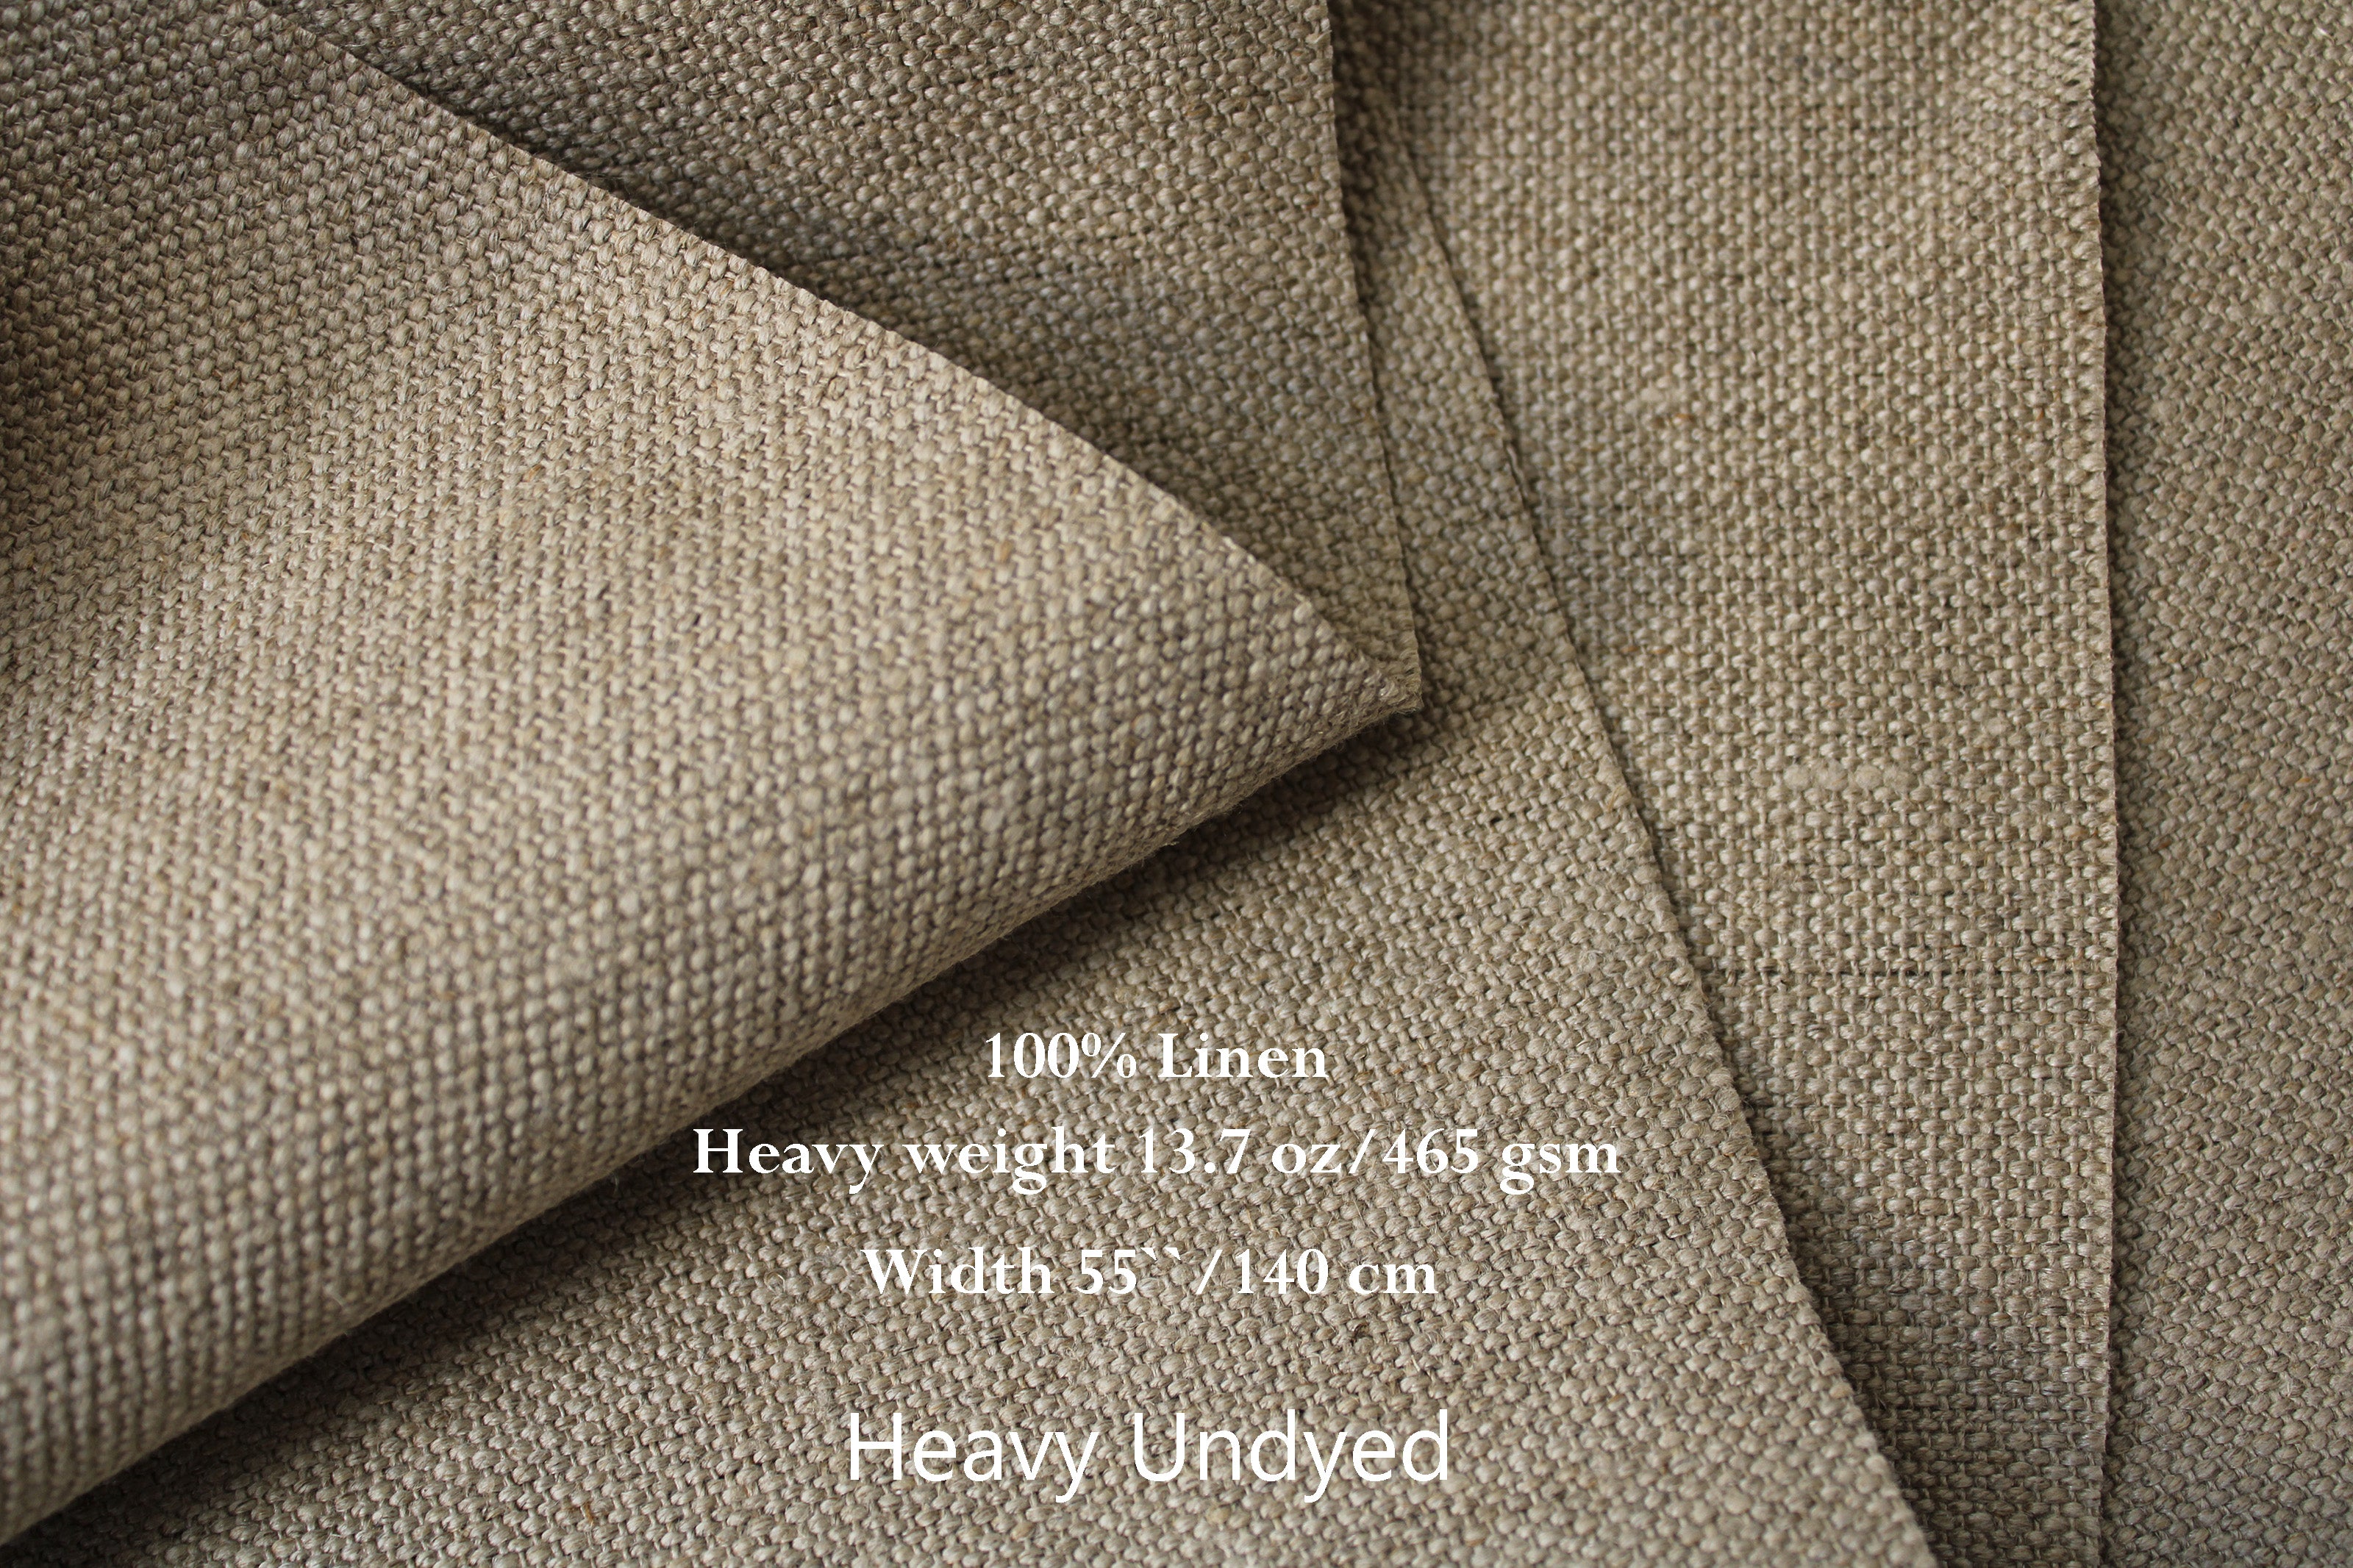 Upholstery Linen Fabric / Heavyweight Linen Fabric by the yard